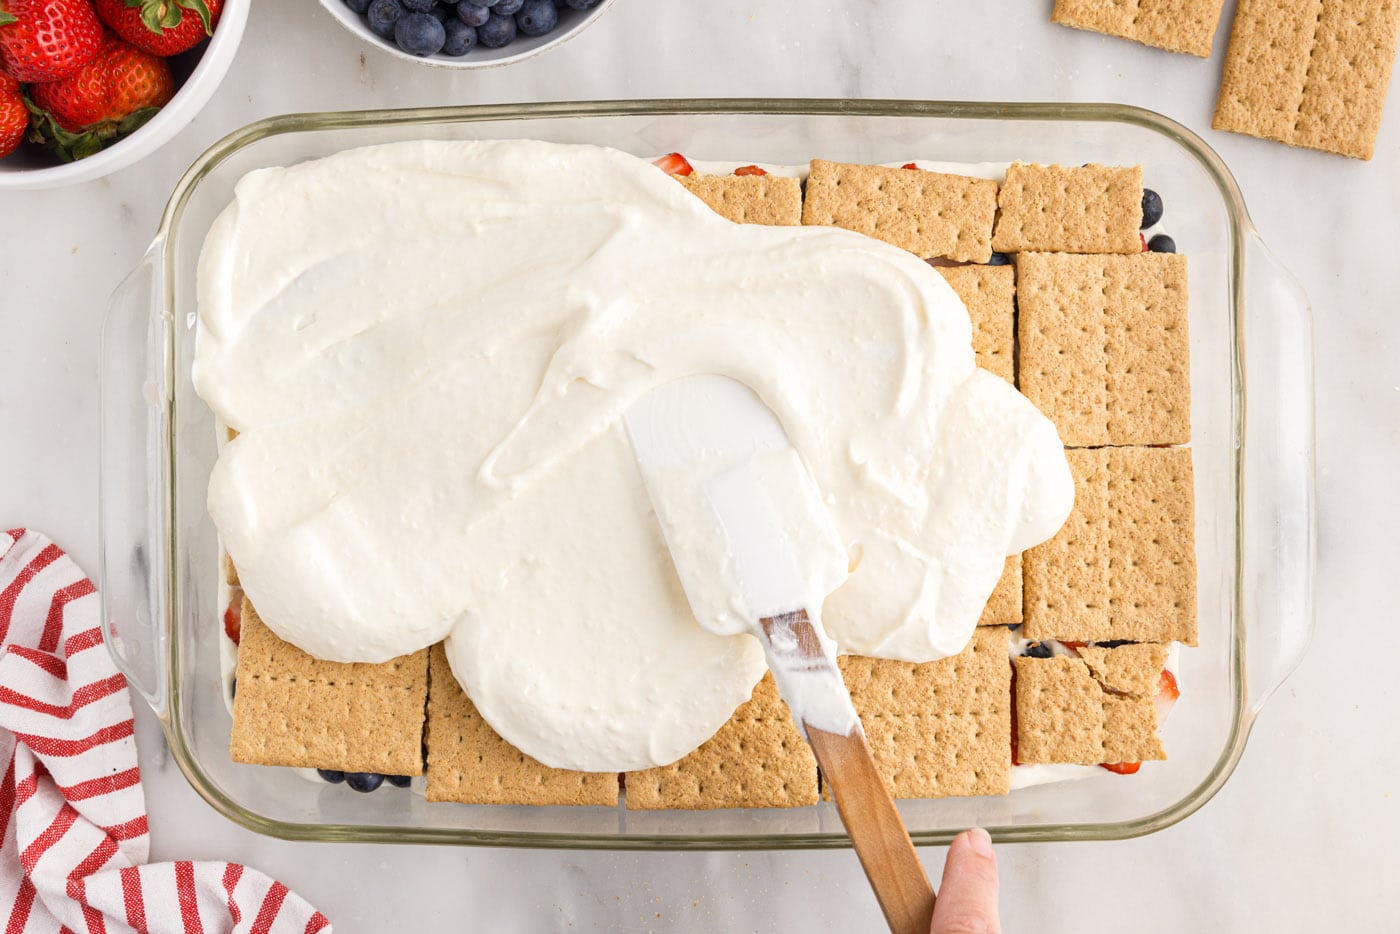 Spreading the cream cheese mixture over the graham crackers